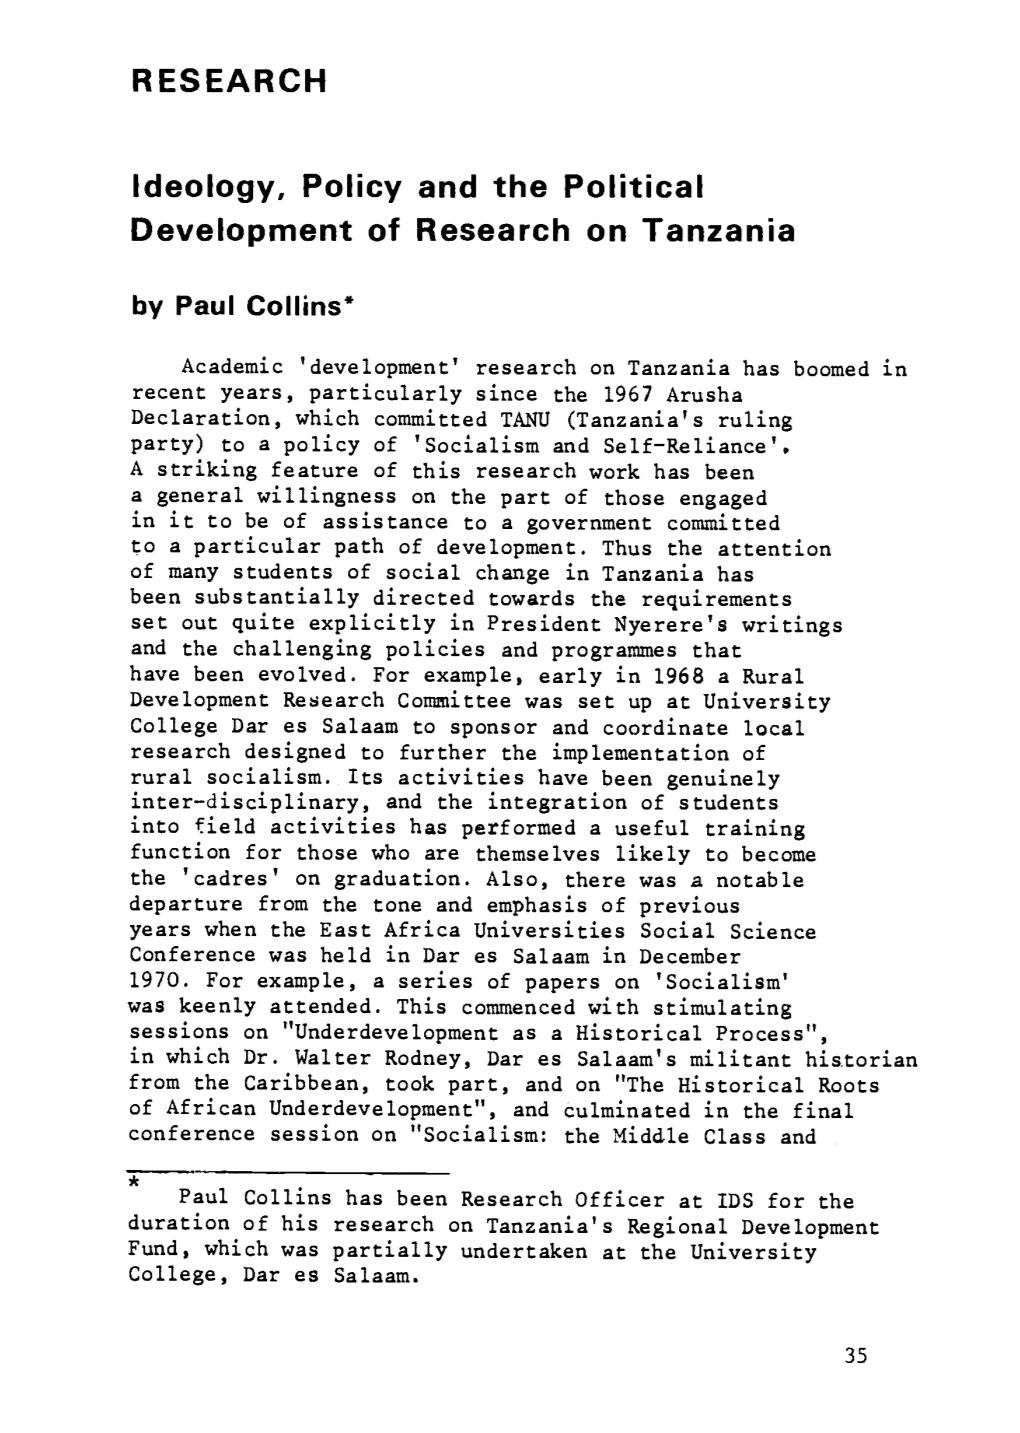 Ideology, Policy and the Political Development of Research on Tanzania by Paul Collins*